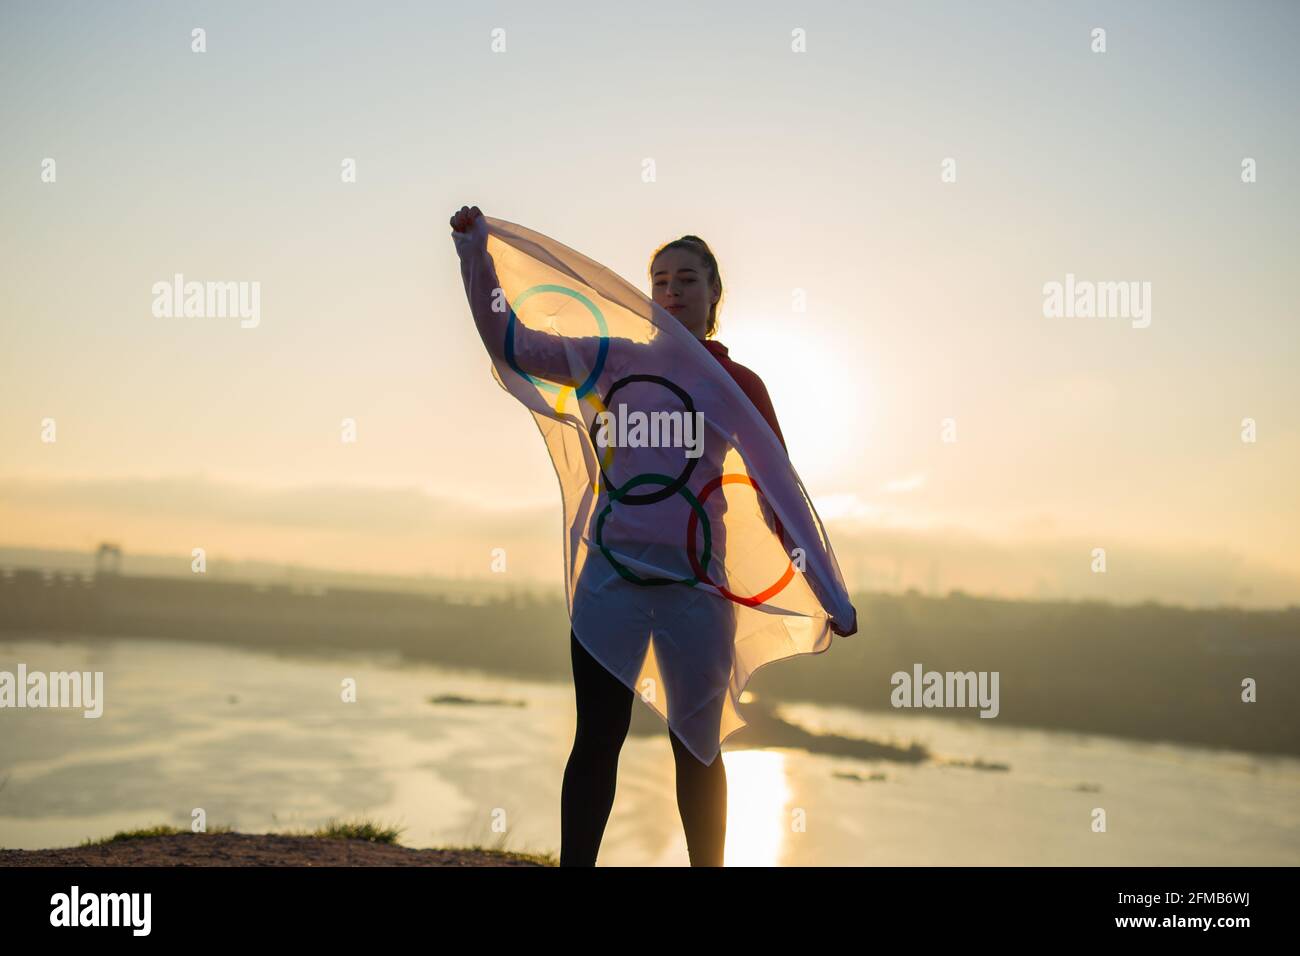 Woman with flag doing martial arts exercises at sunset light Stock Photo